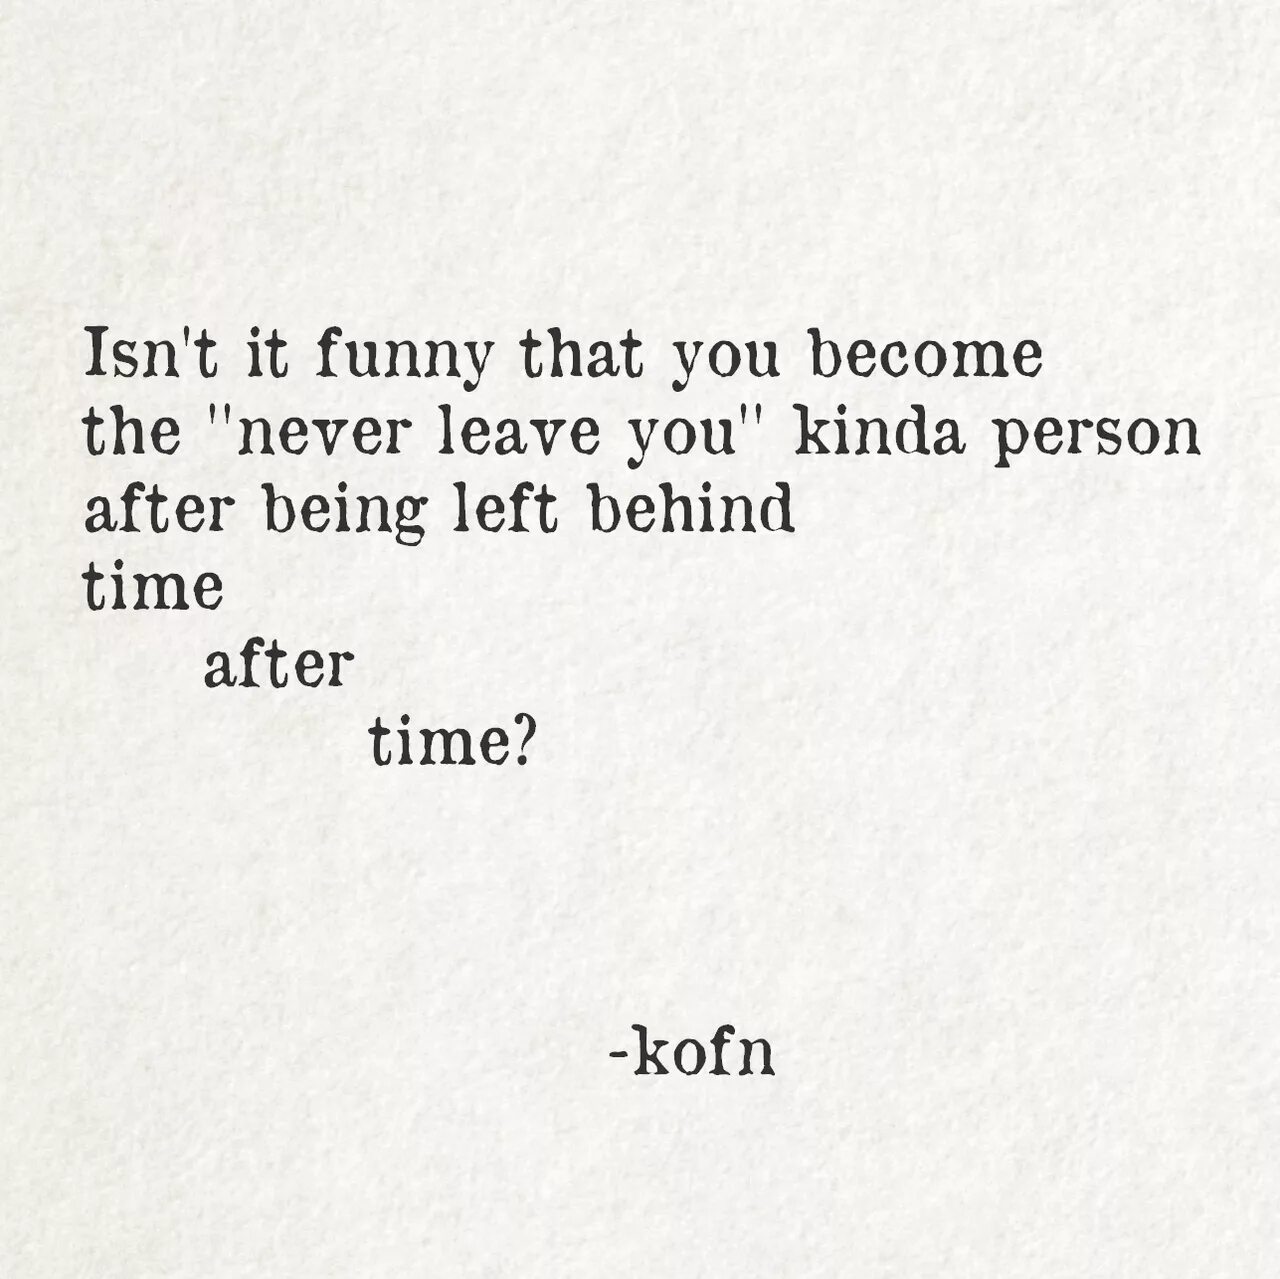 Quotes about leaving the person behind quotes. You left him behind.